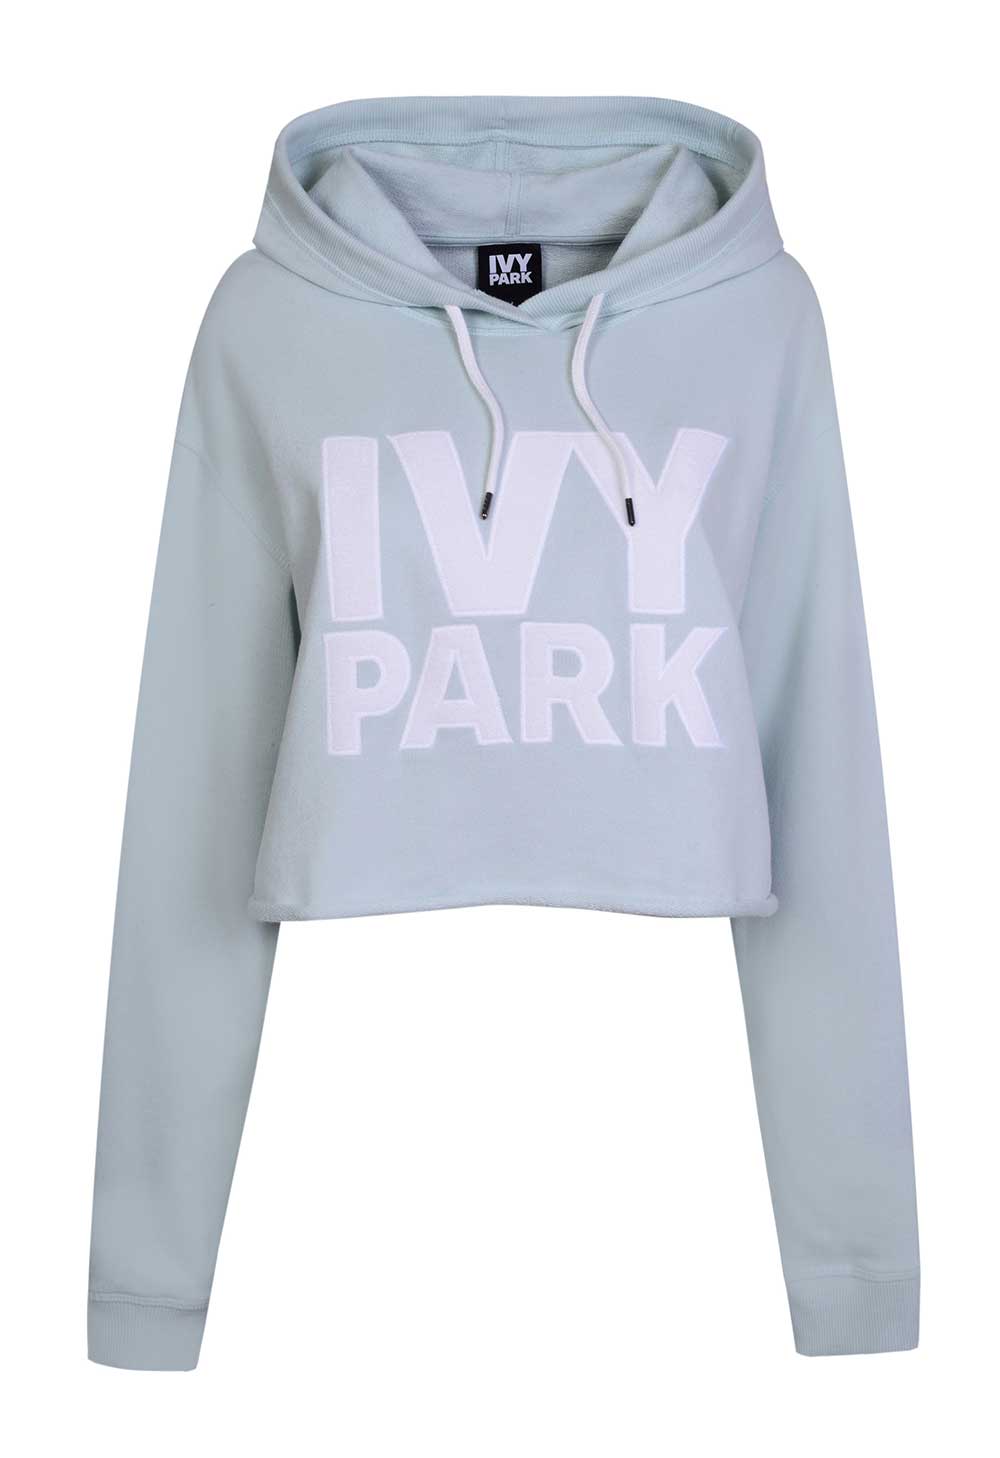 Cropped Logo Detailed Hoodie by Ivy Park, $90 from Topshop